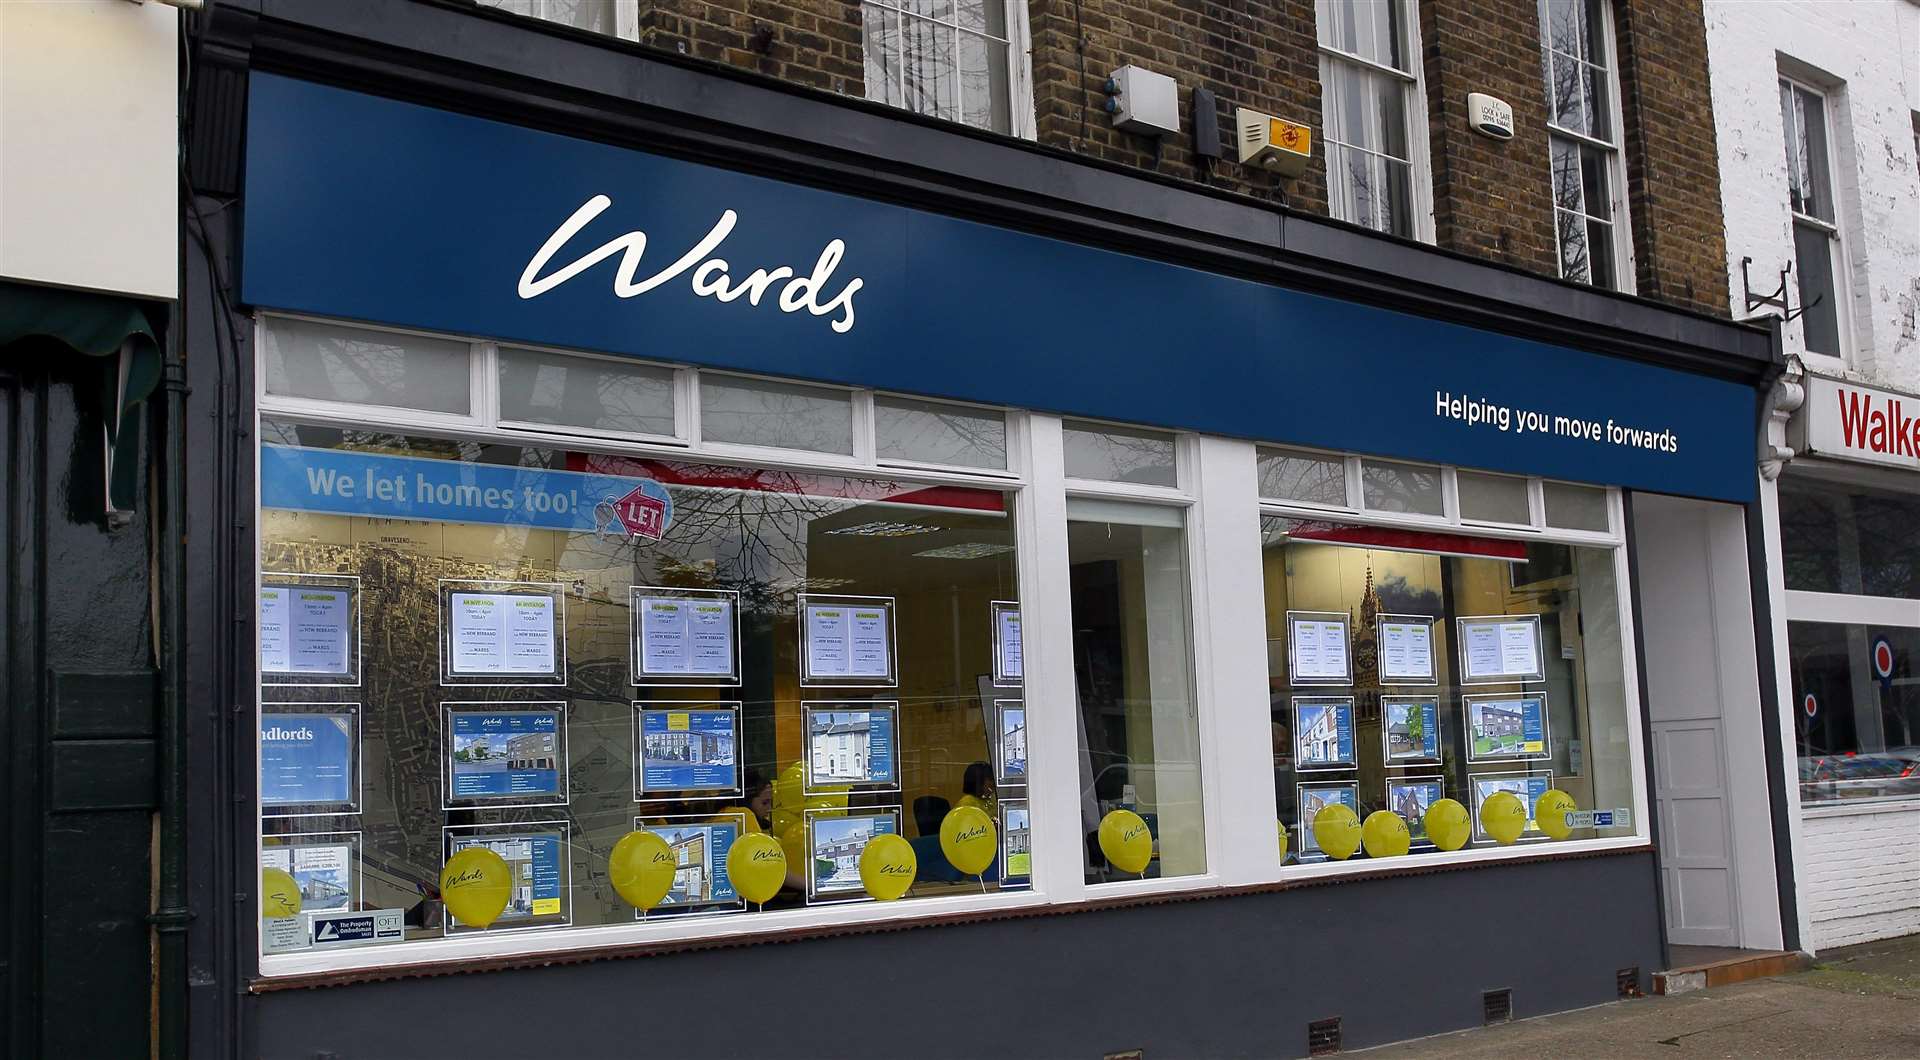 Wards recently underwent a rigorous re-branding after entering a partnership with FINALLY. The company aims to provide a premium service where sellers are kept up-to-date.